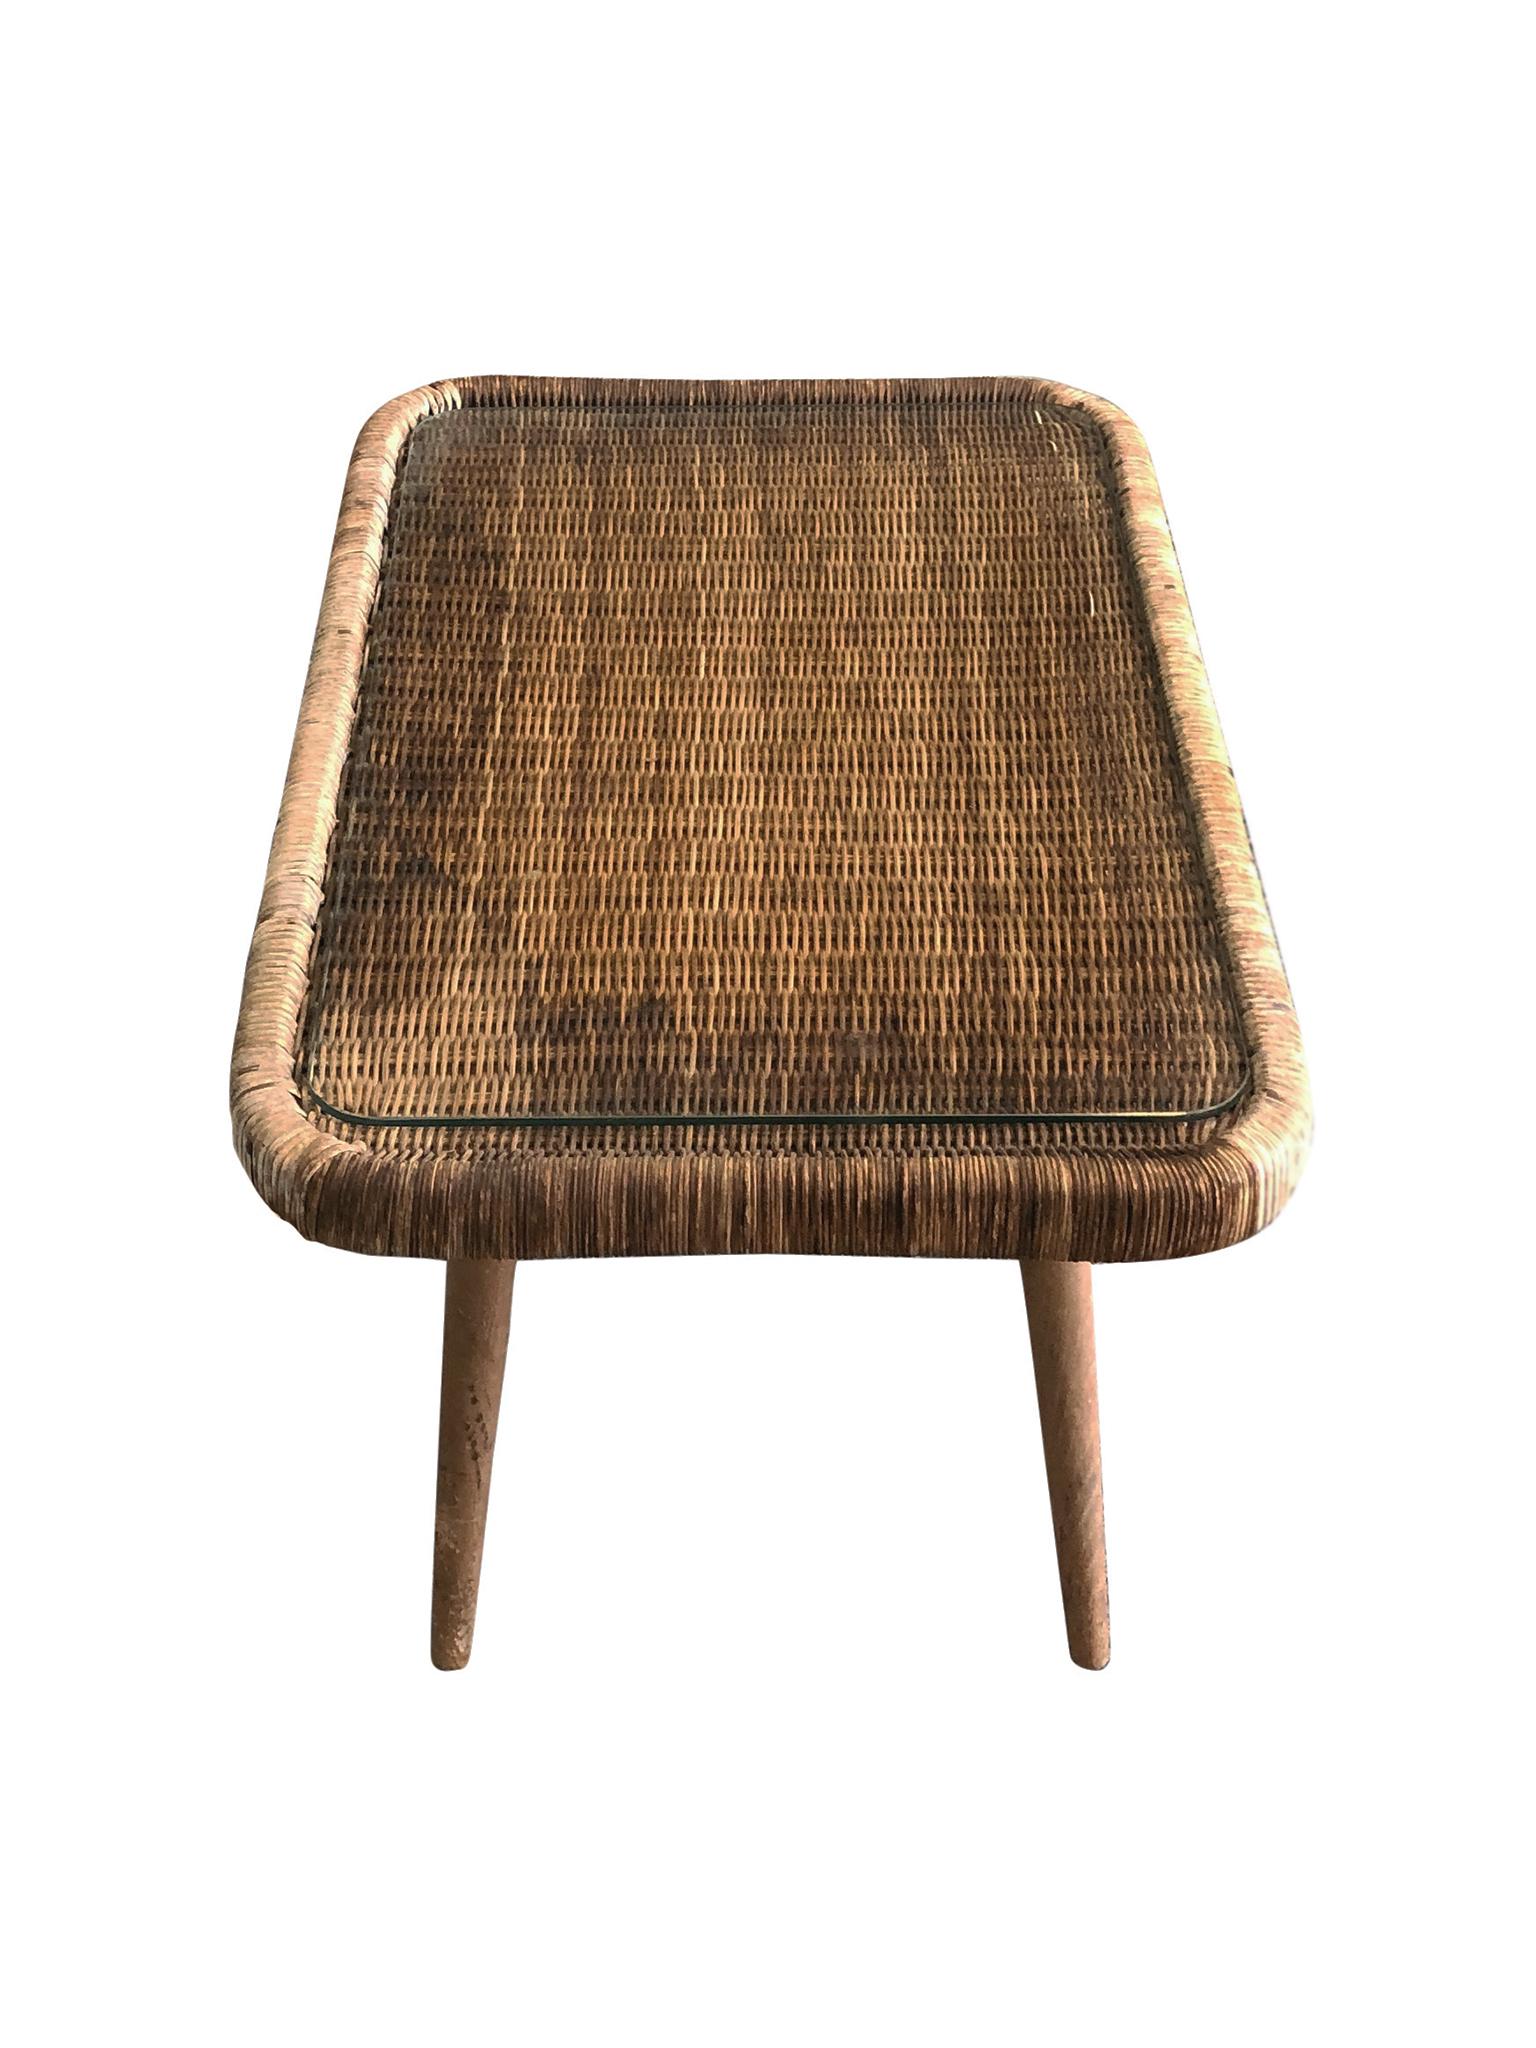 Mid-20th Century 1950s Rattan Side Tables Attributed to Isamu Kenmochi, a Set of 2